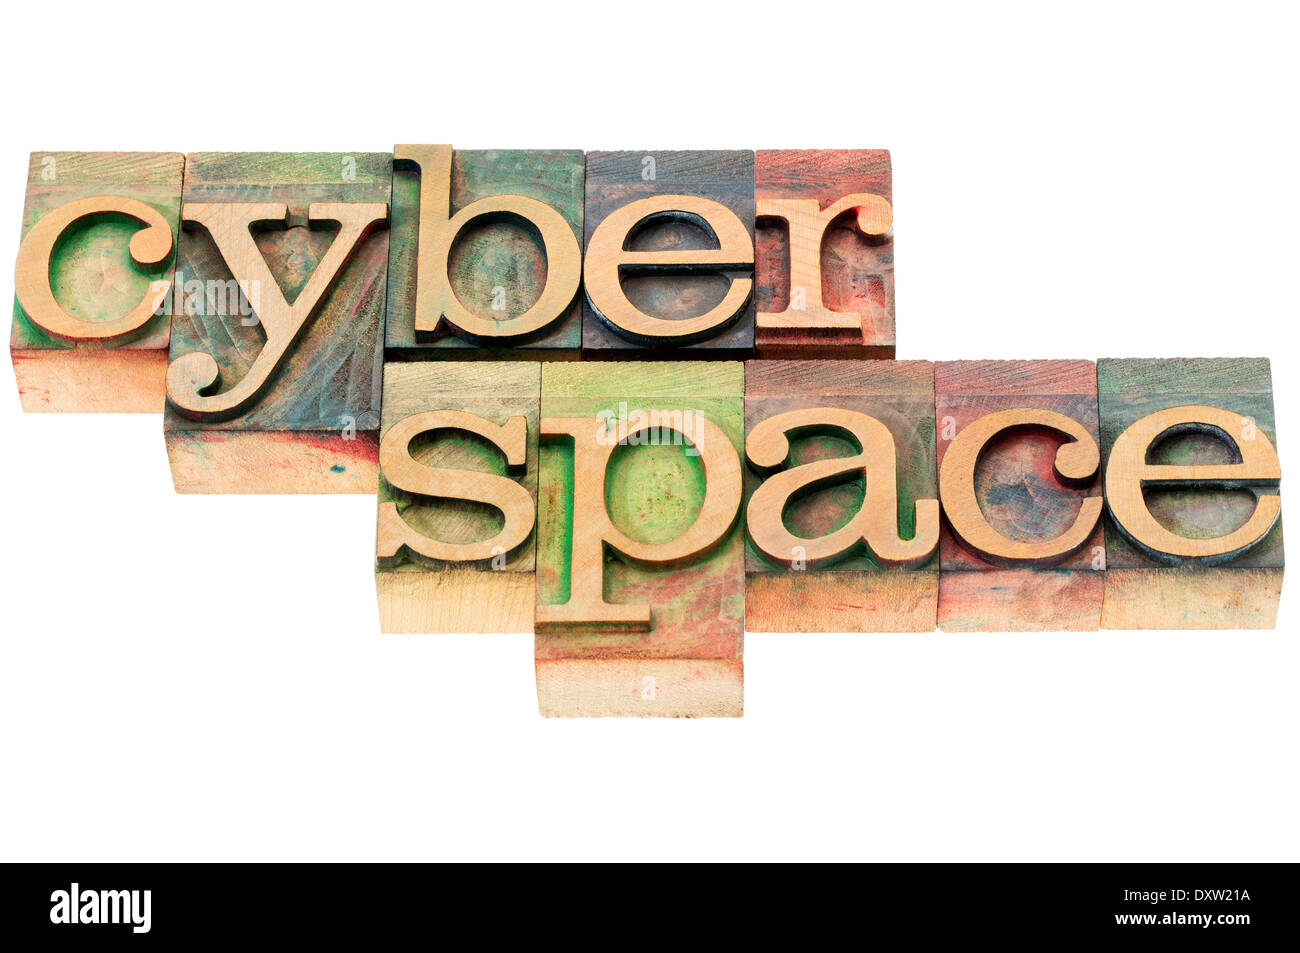 cyberspace - isolated word in n letterpress wood type blocks stained by color inks Stock Photo